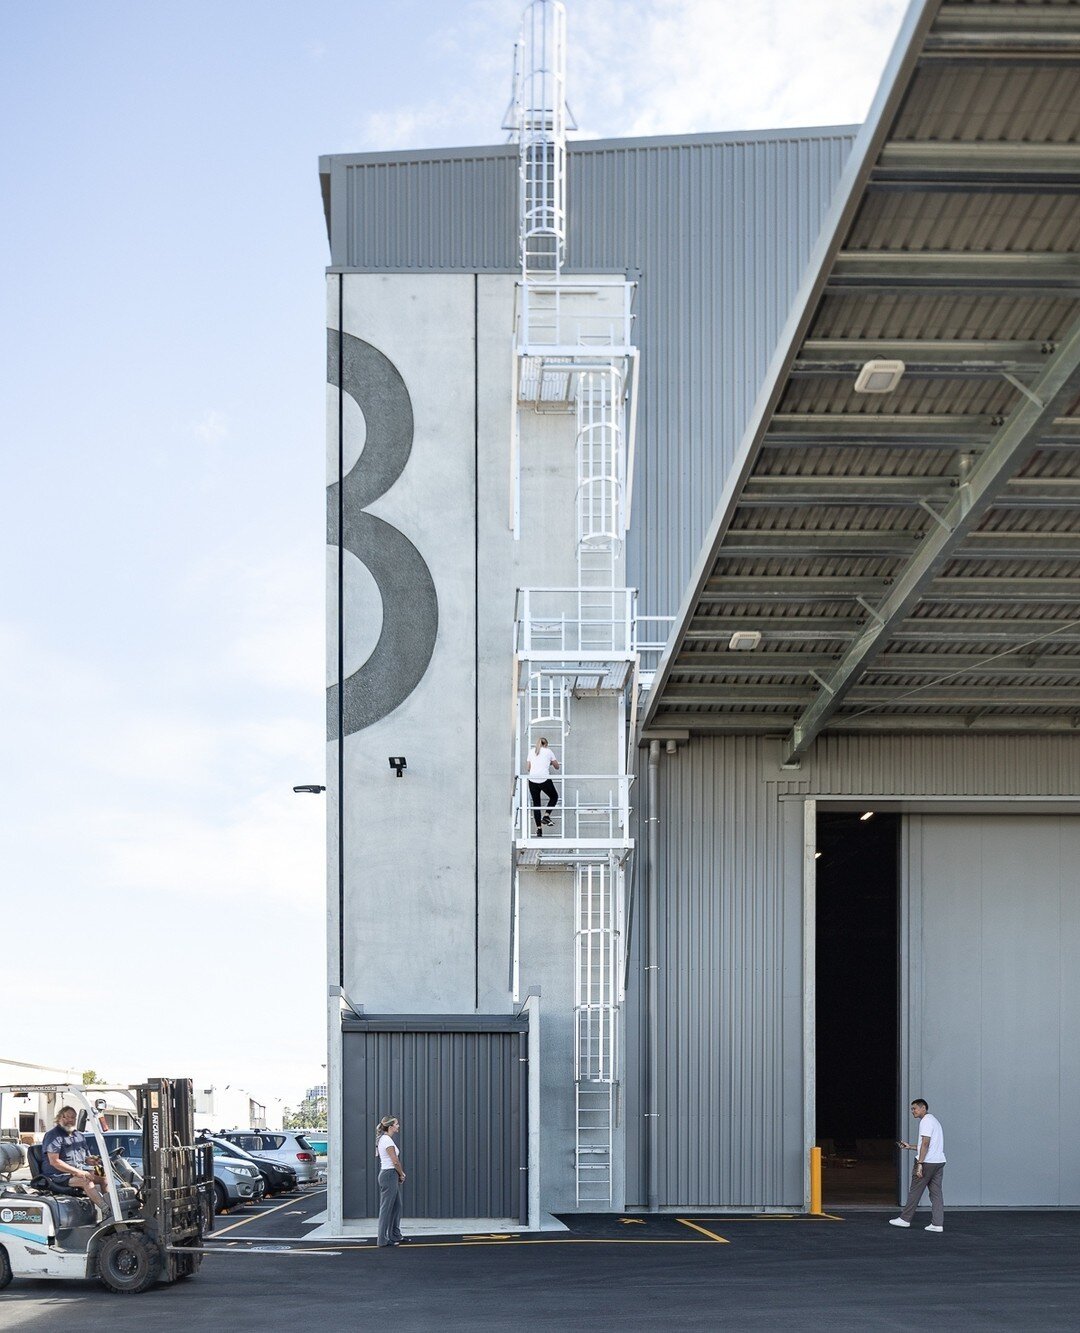 A project of immense scale, shooting at the Auckland Film Studios for @ignitearchitects was a first. Sized at 2000m2 each, we certainly got our steps in that day shooting 'Te Pūtahi', the two new world-class stages in West Auckland. ⁠
⁠
Thank you to 